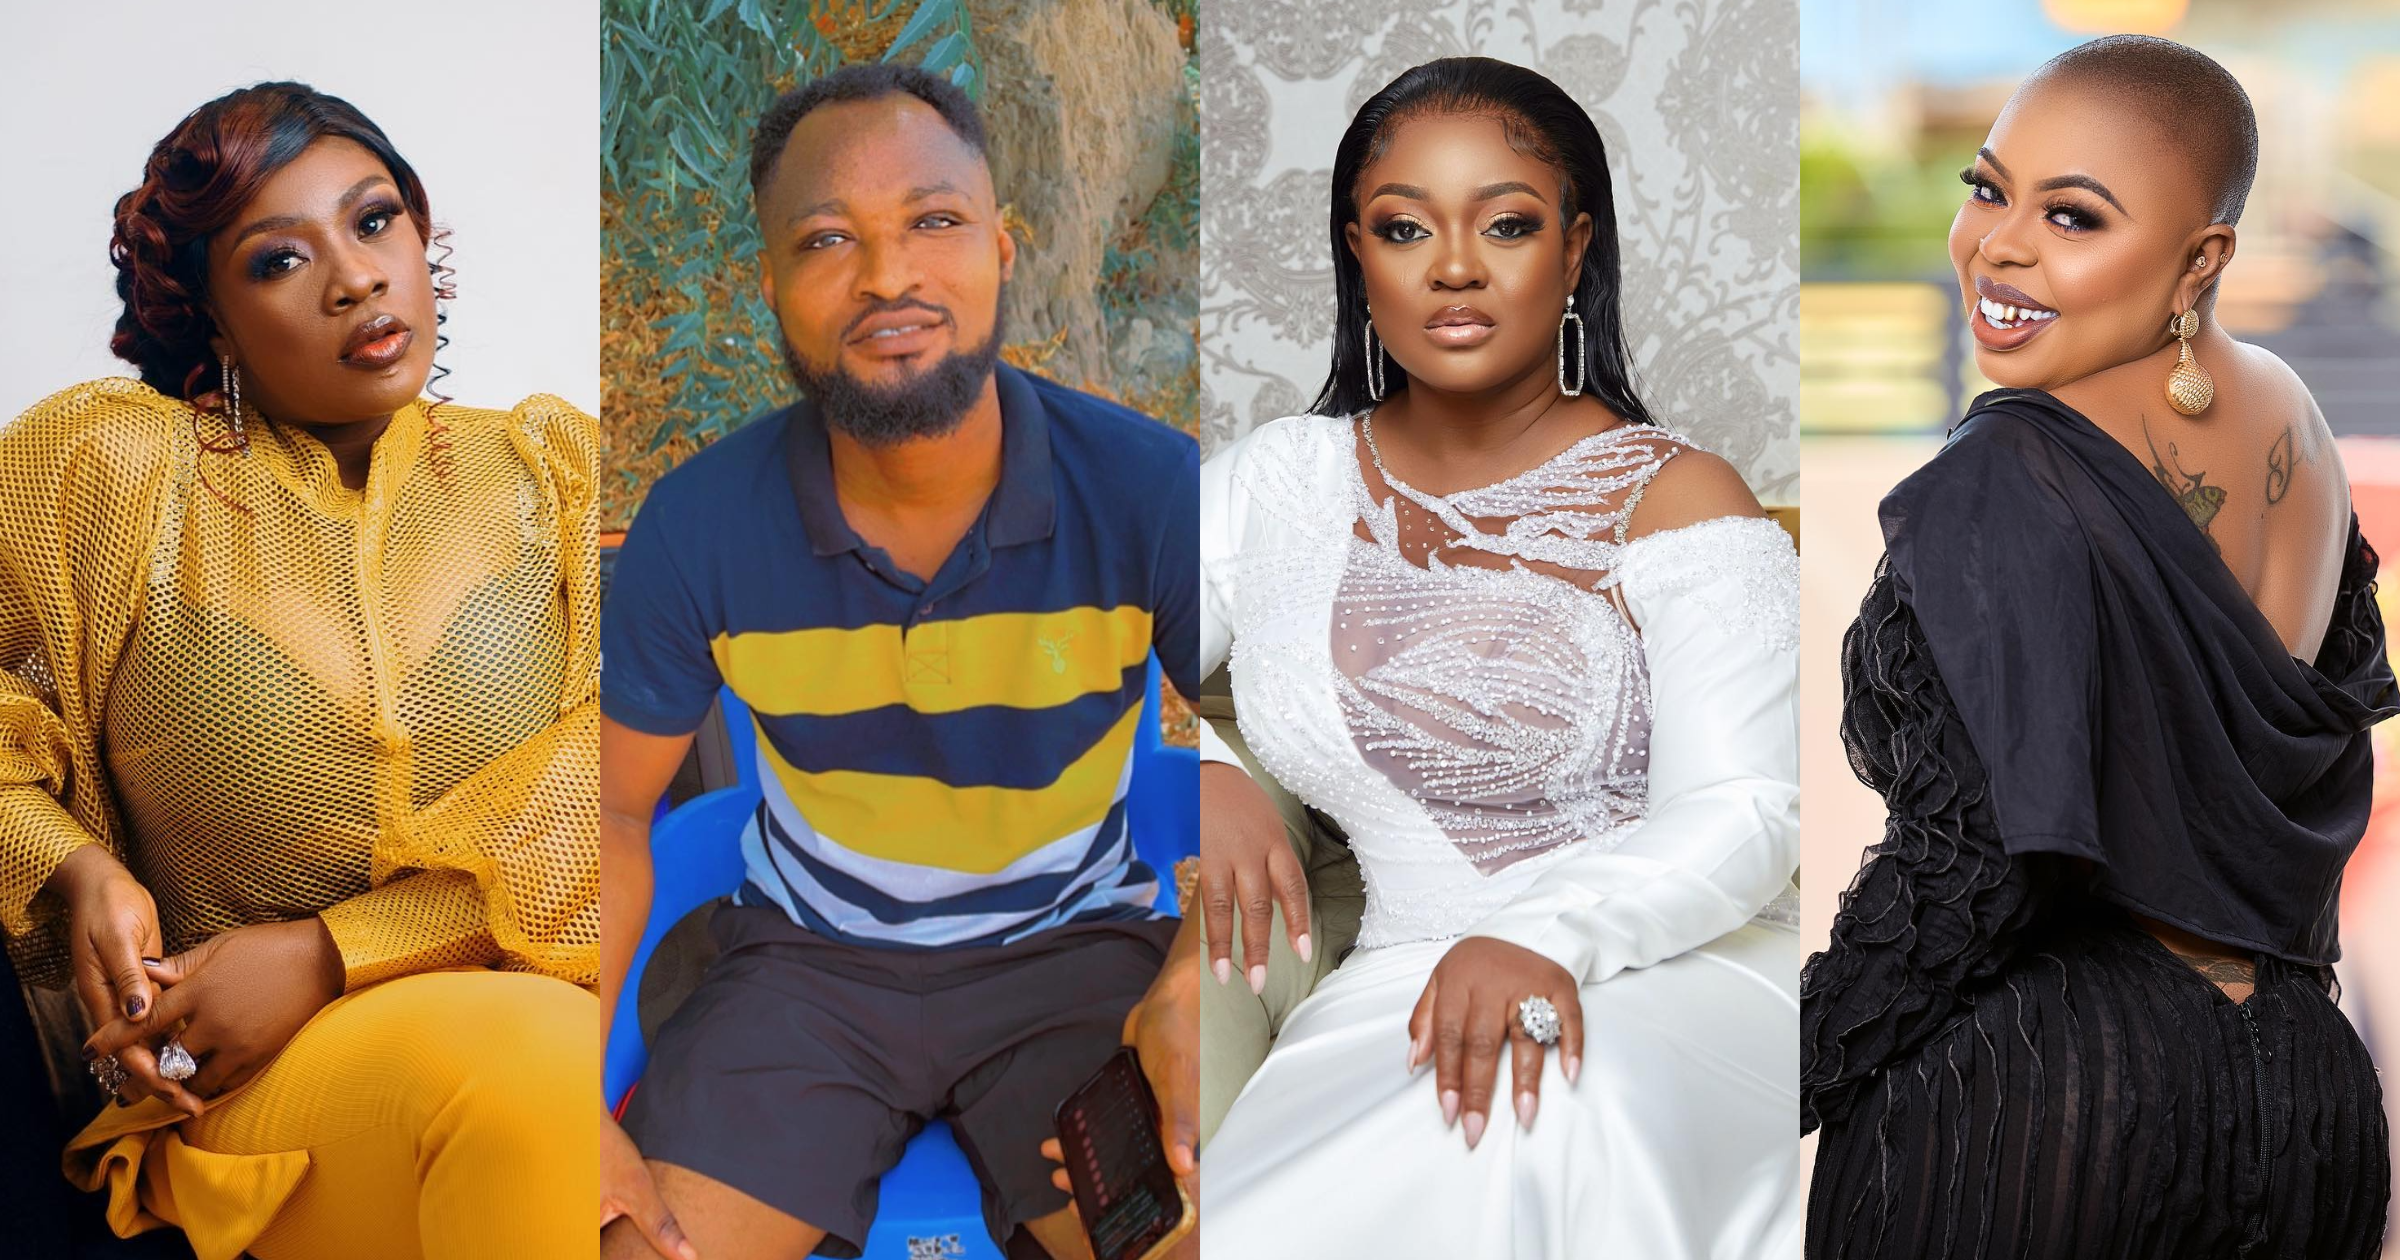 Jackie Appiah, Afia Schwar, Funny Face and 7 other celebs who marriages failed and ended within a short time